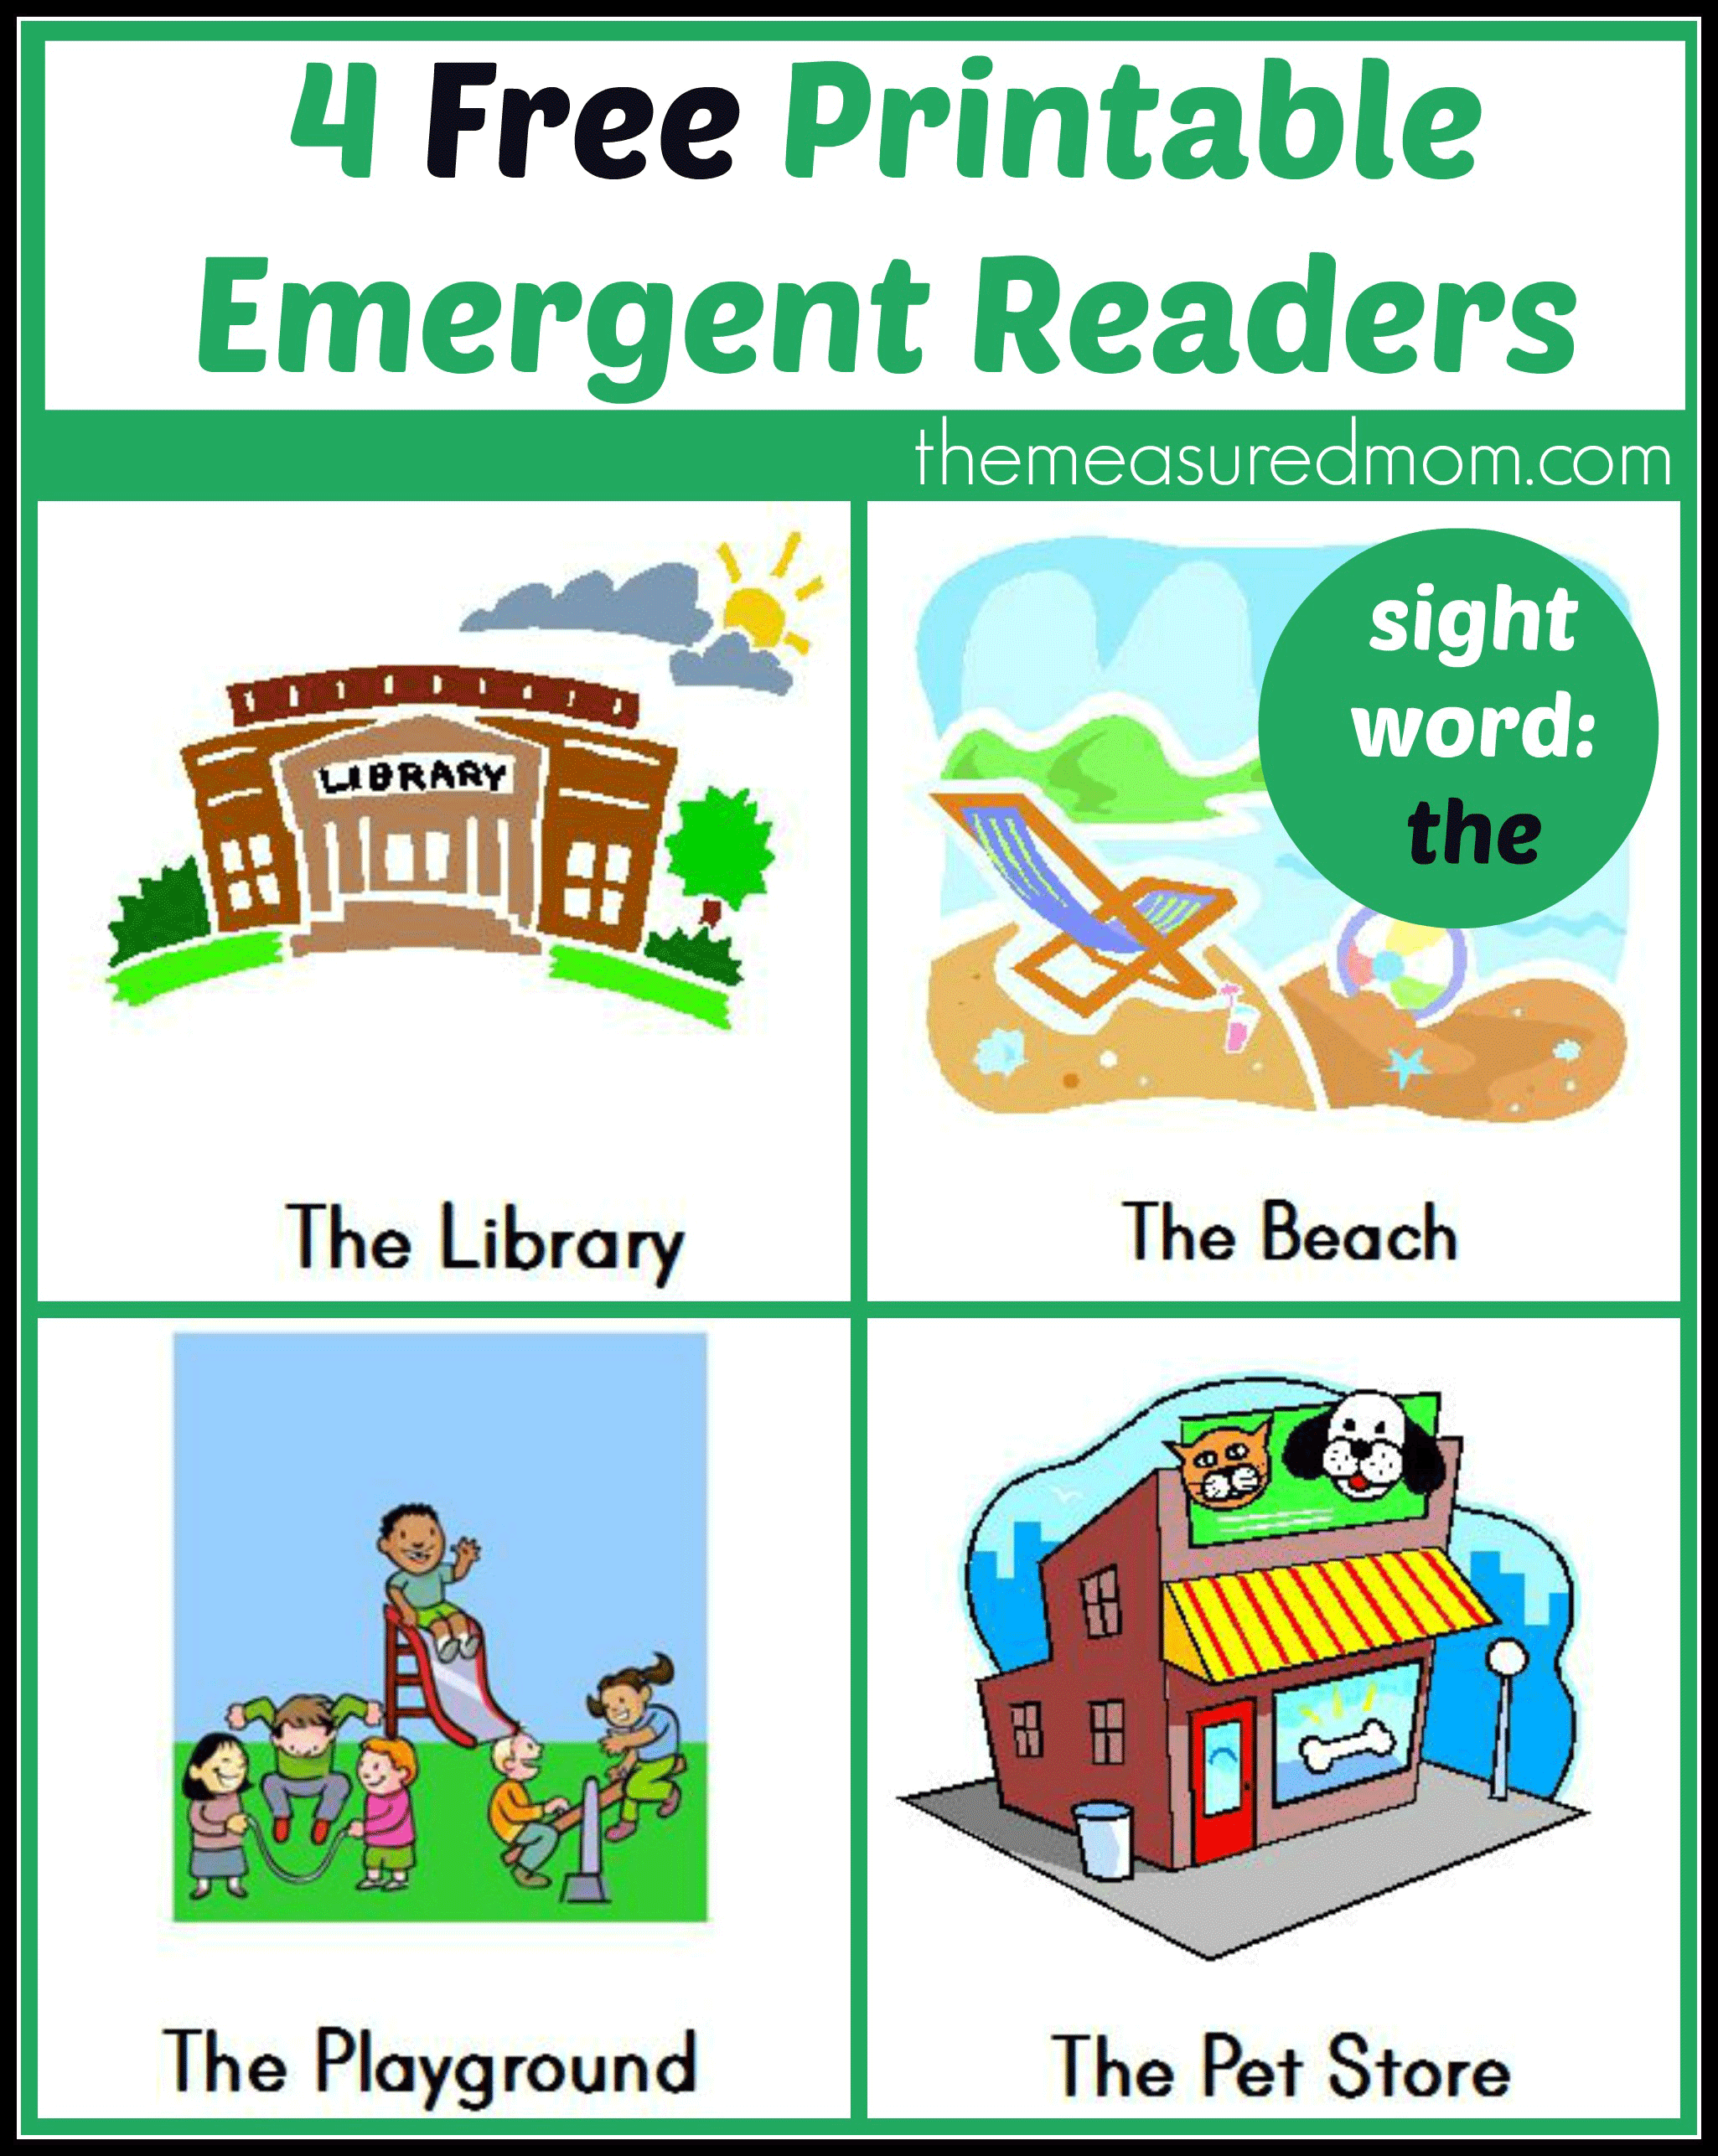 free-printable-emergent-readers-sight-word-the-the-measured-mom